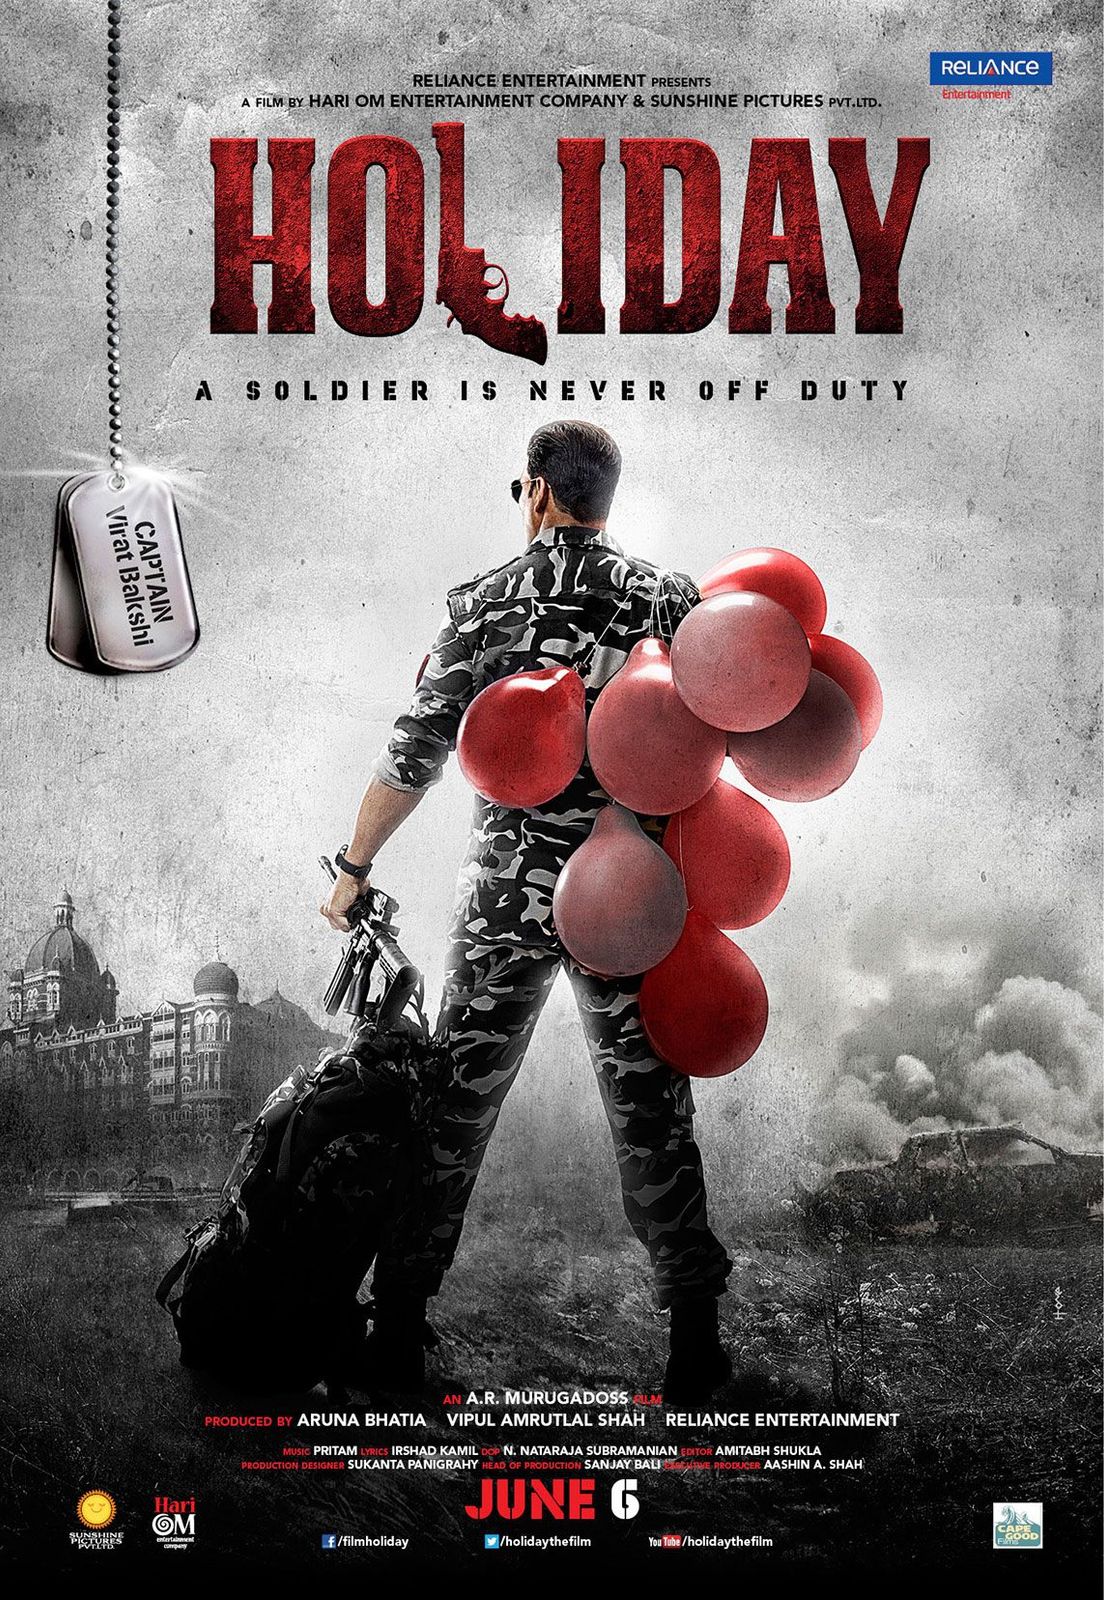 Holiday: A Soldier Is Never Off Duty garners 40 crores plus in its Opening Weekend